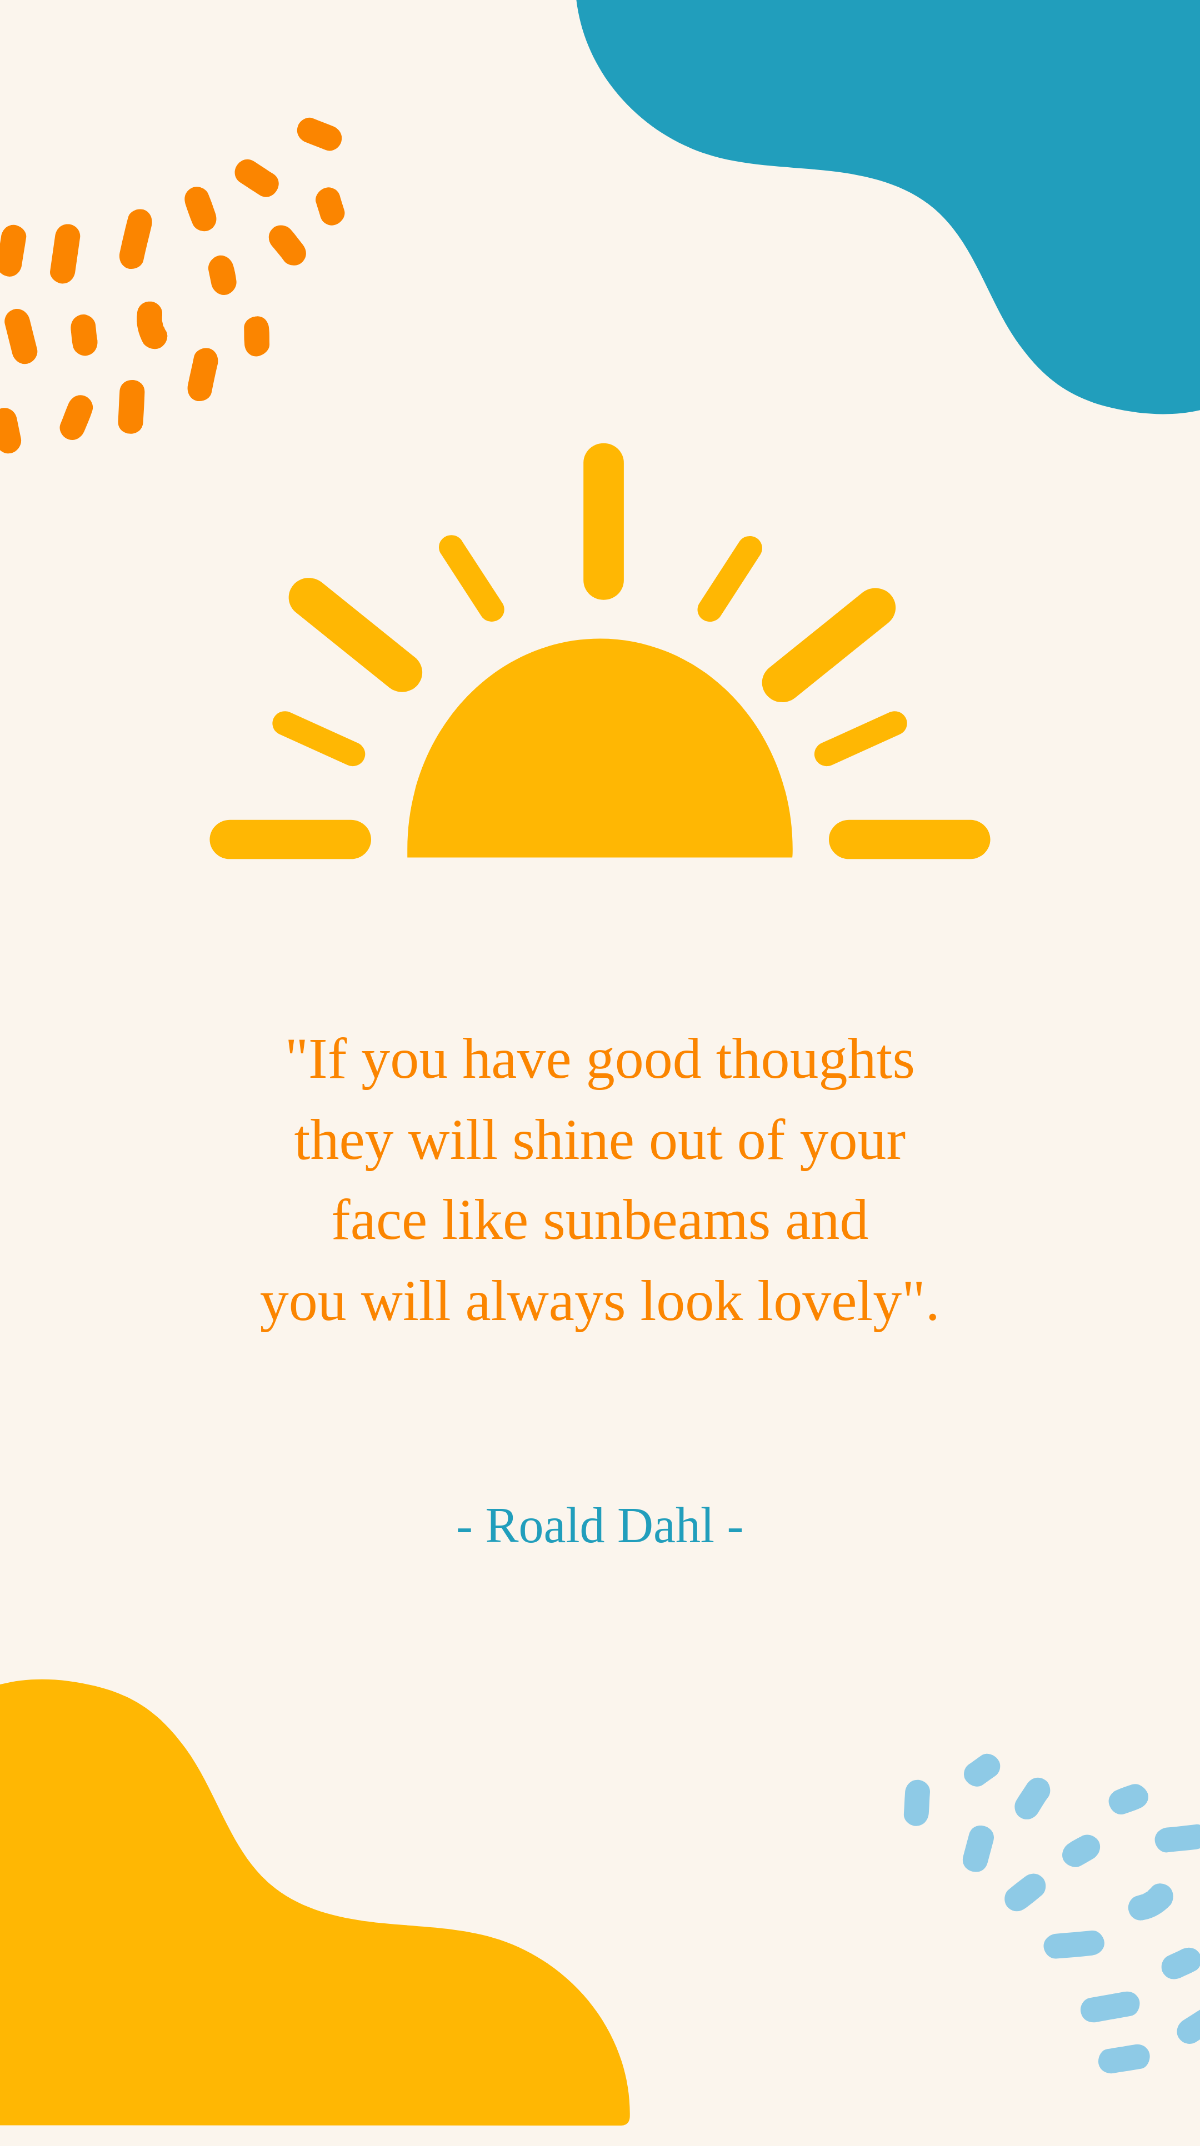 Roald Dahl - “If you have good thoughts they will shine out of your ...